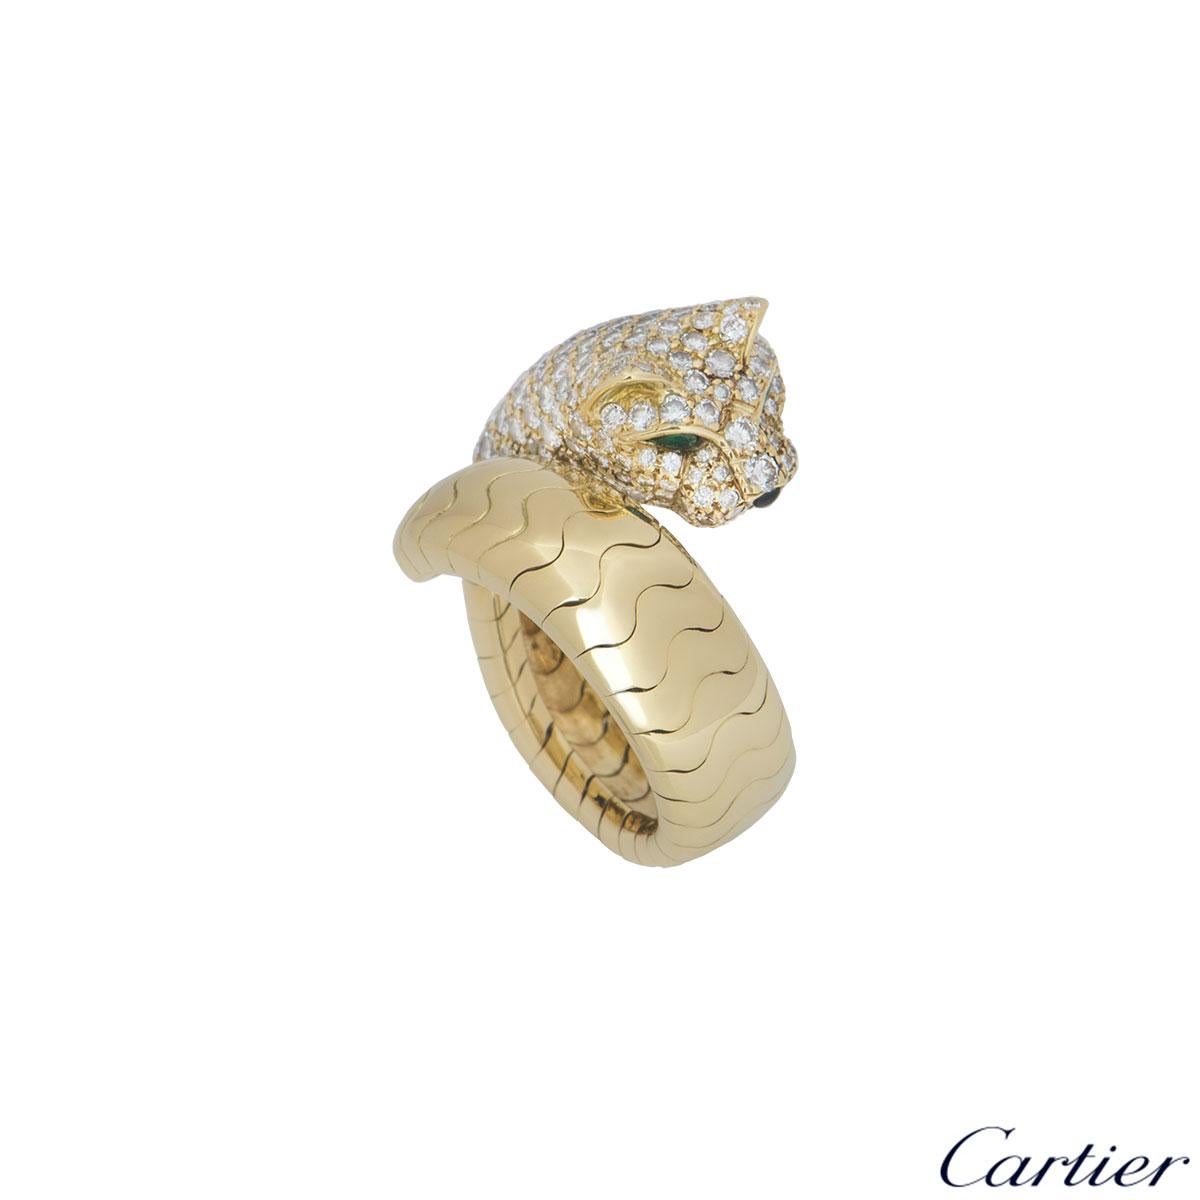 A beautiful 18k yellow gold ring by Cartier from the Panthere De Cartier collection. The ring comprises of a panther head motif with 158 round brilliant cut diamonds pave set with a weight of 2.07ct, F+ colour and VS+ in clarity, with two emeralds